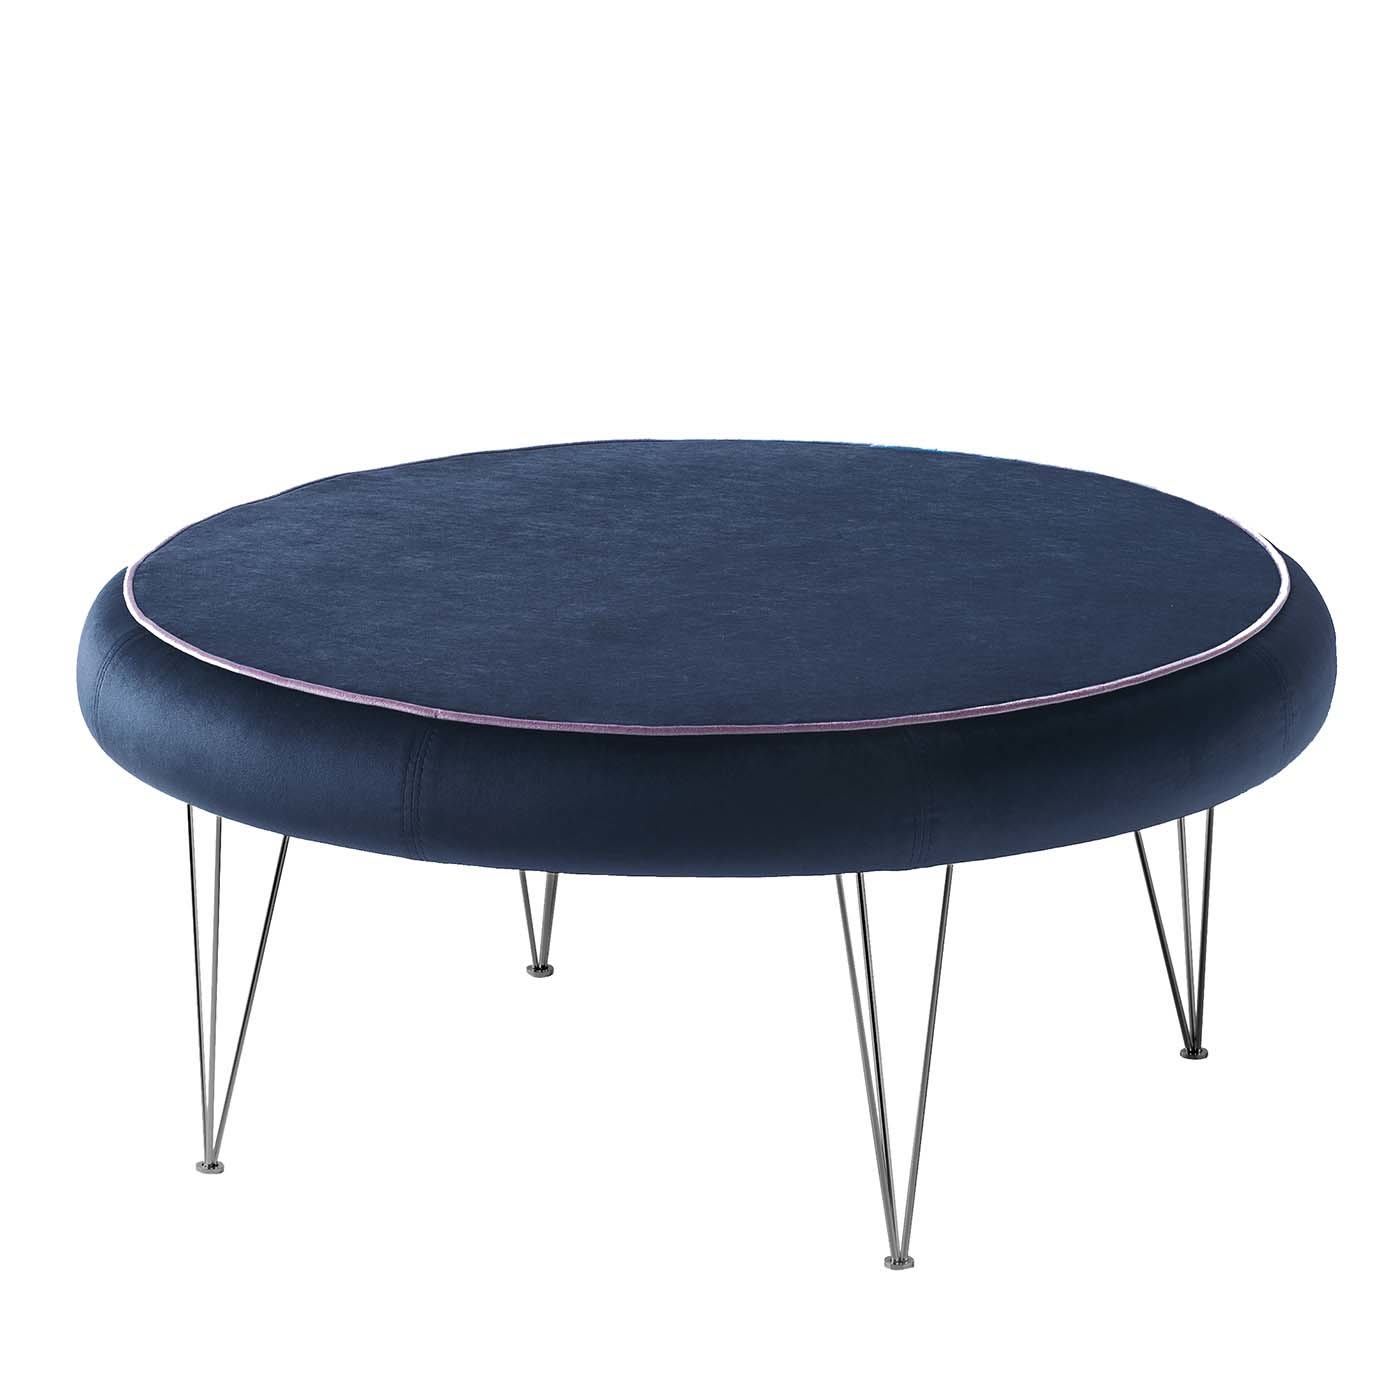 Pills Blue Oval Pouf with Black Legs - Gam Home